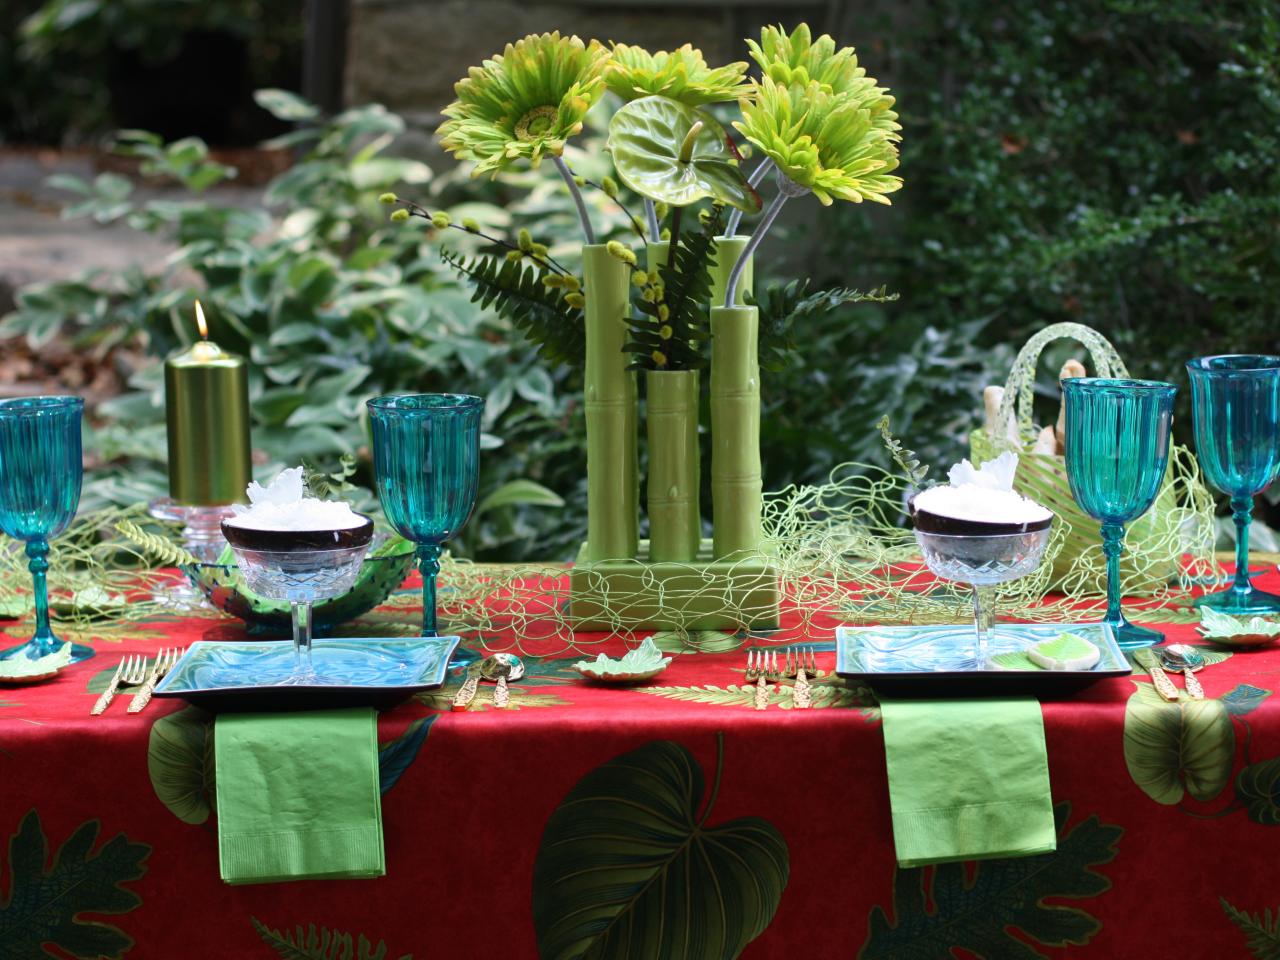 Sizzling Themes for an Outdoor Summer Party | Outdoor ...